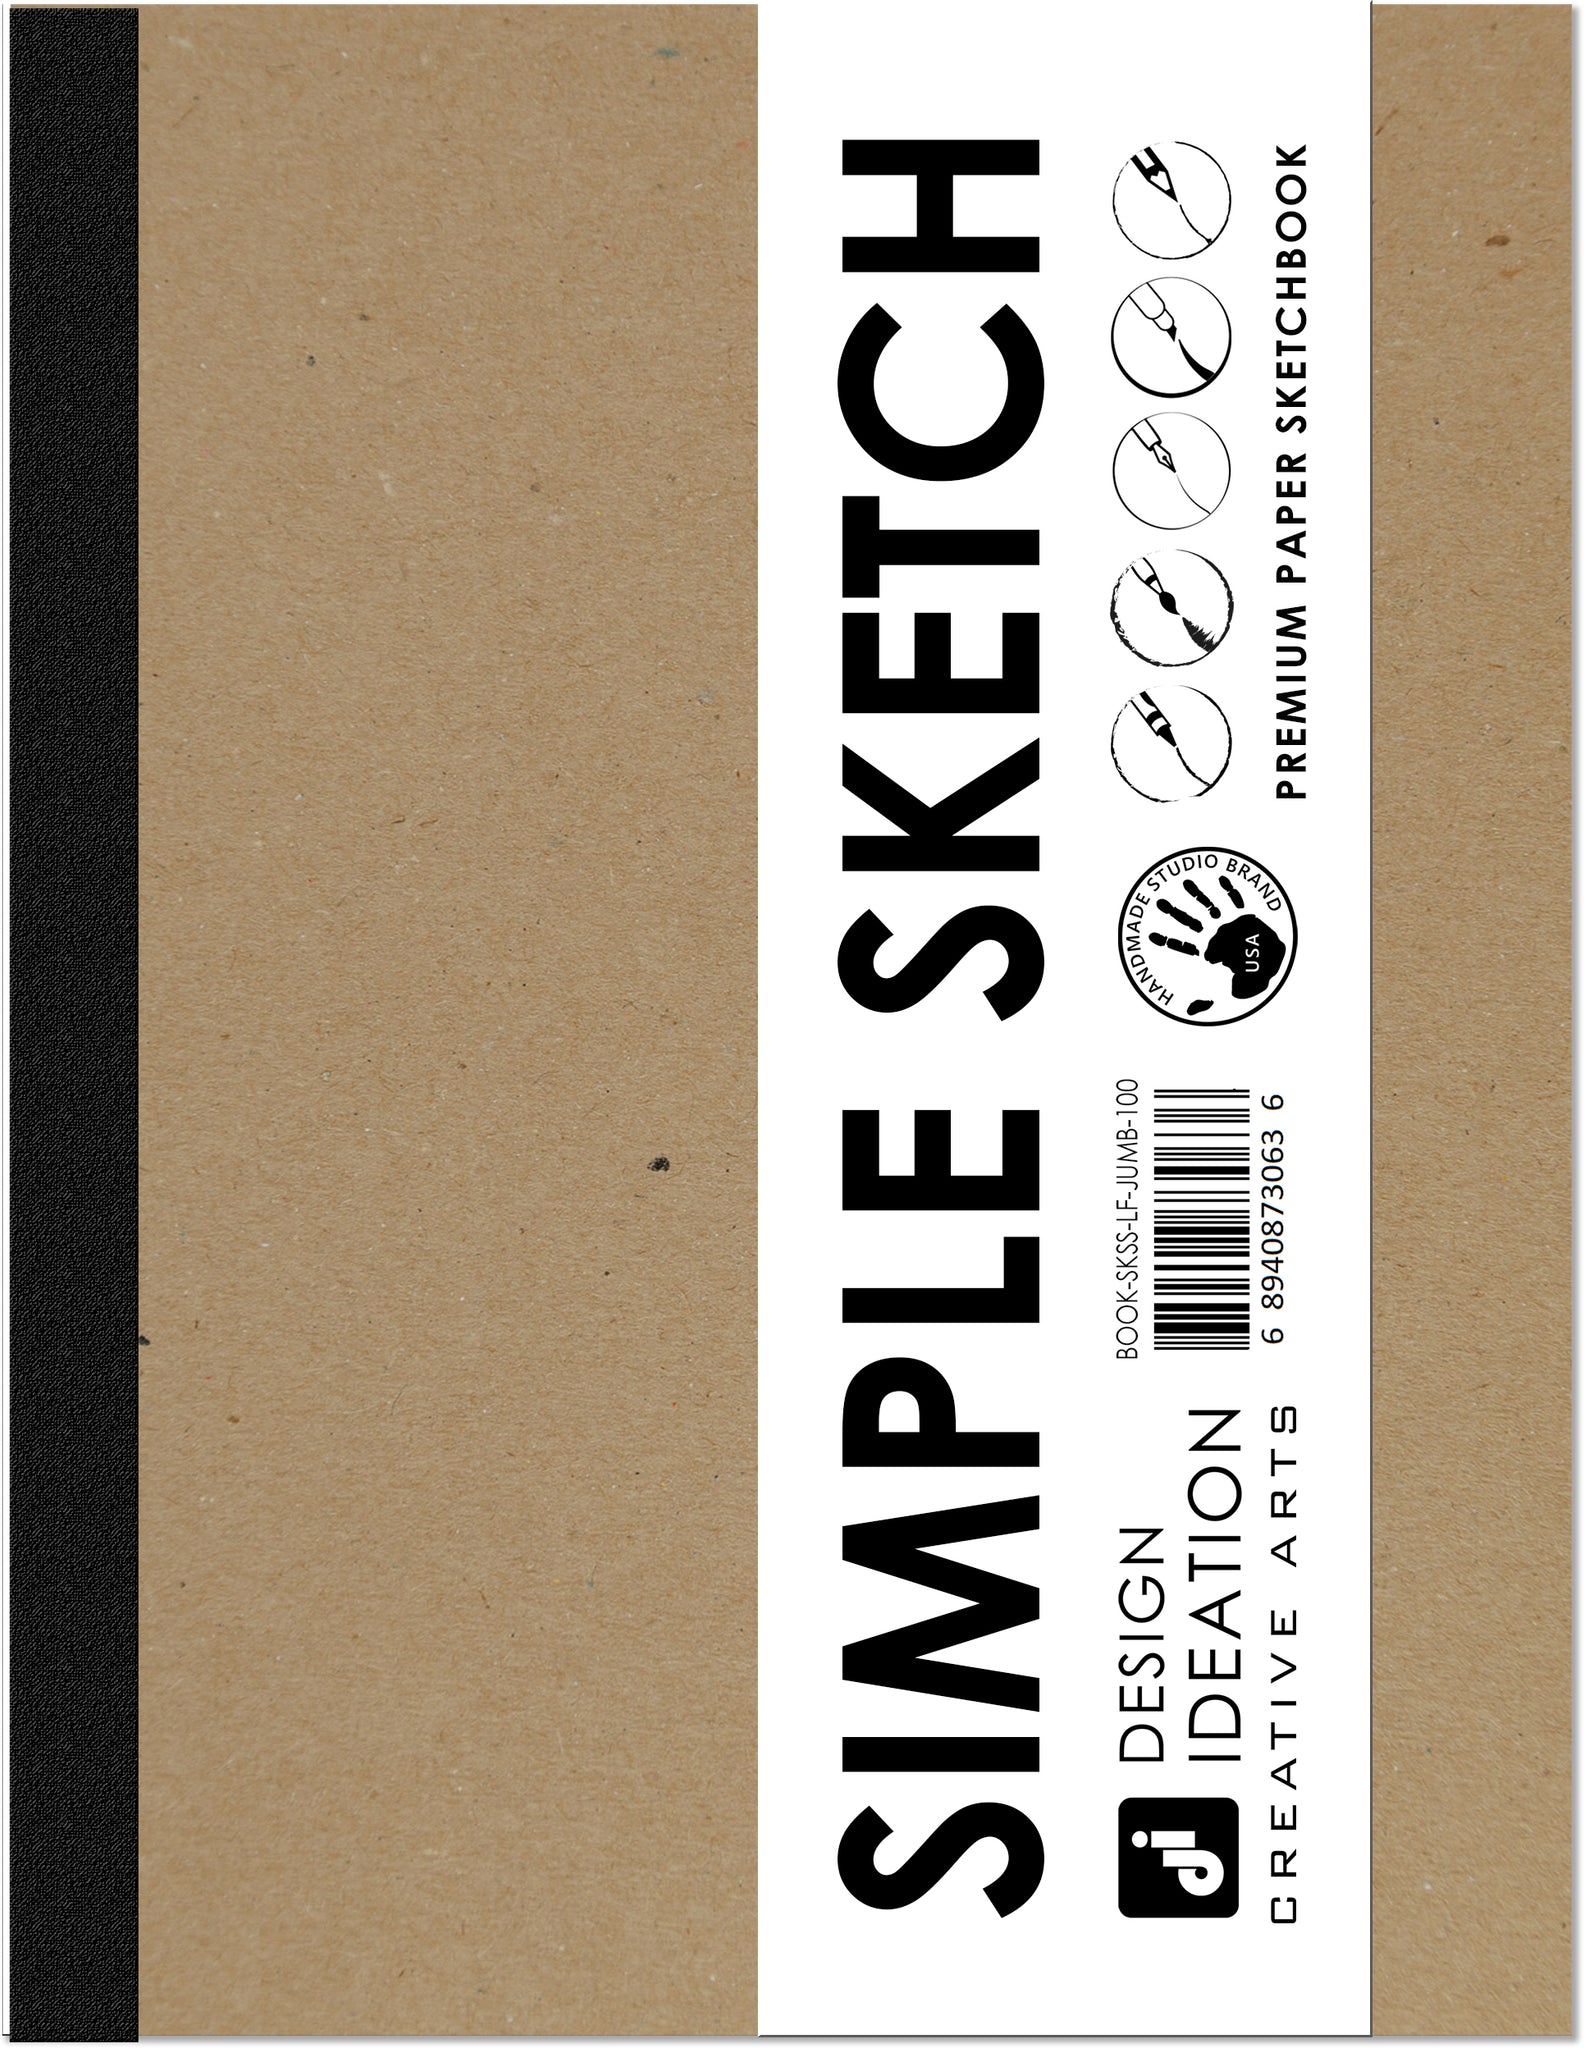  Design Ideation Lay Flat Multi Media Sketchbook. Removable  Sheet Drawing Book for Pencil, Ink, Marker, Charcoal and Watercolor Paints.  Great for Art, Design and Education. 8.5 x 11